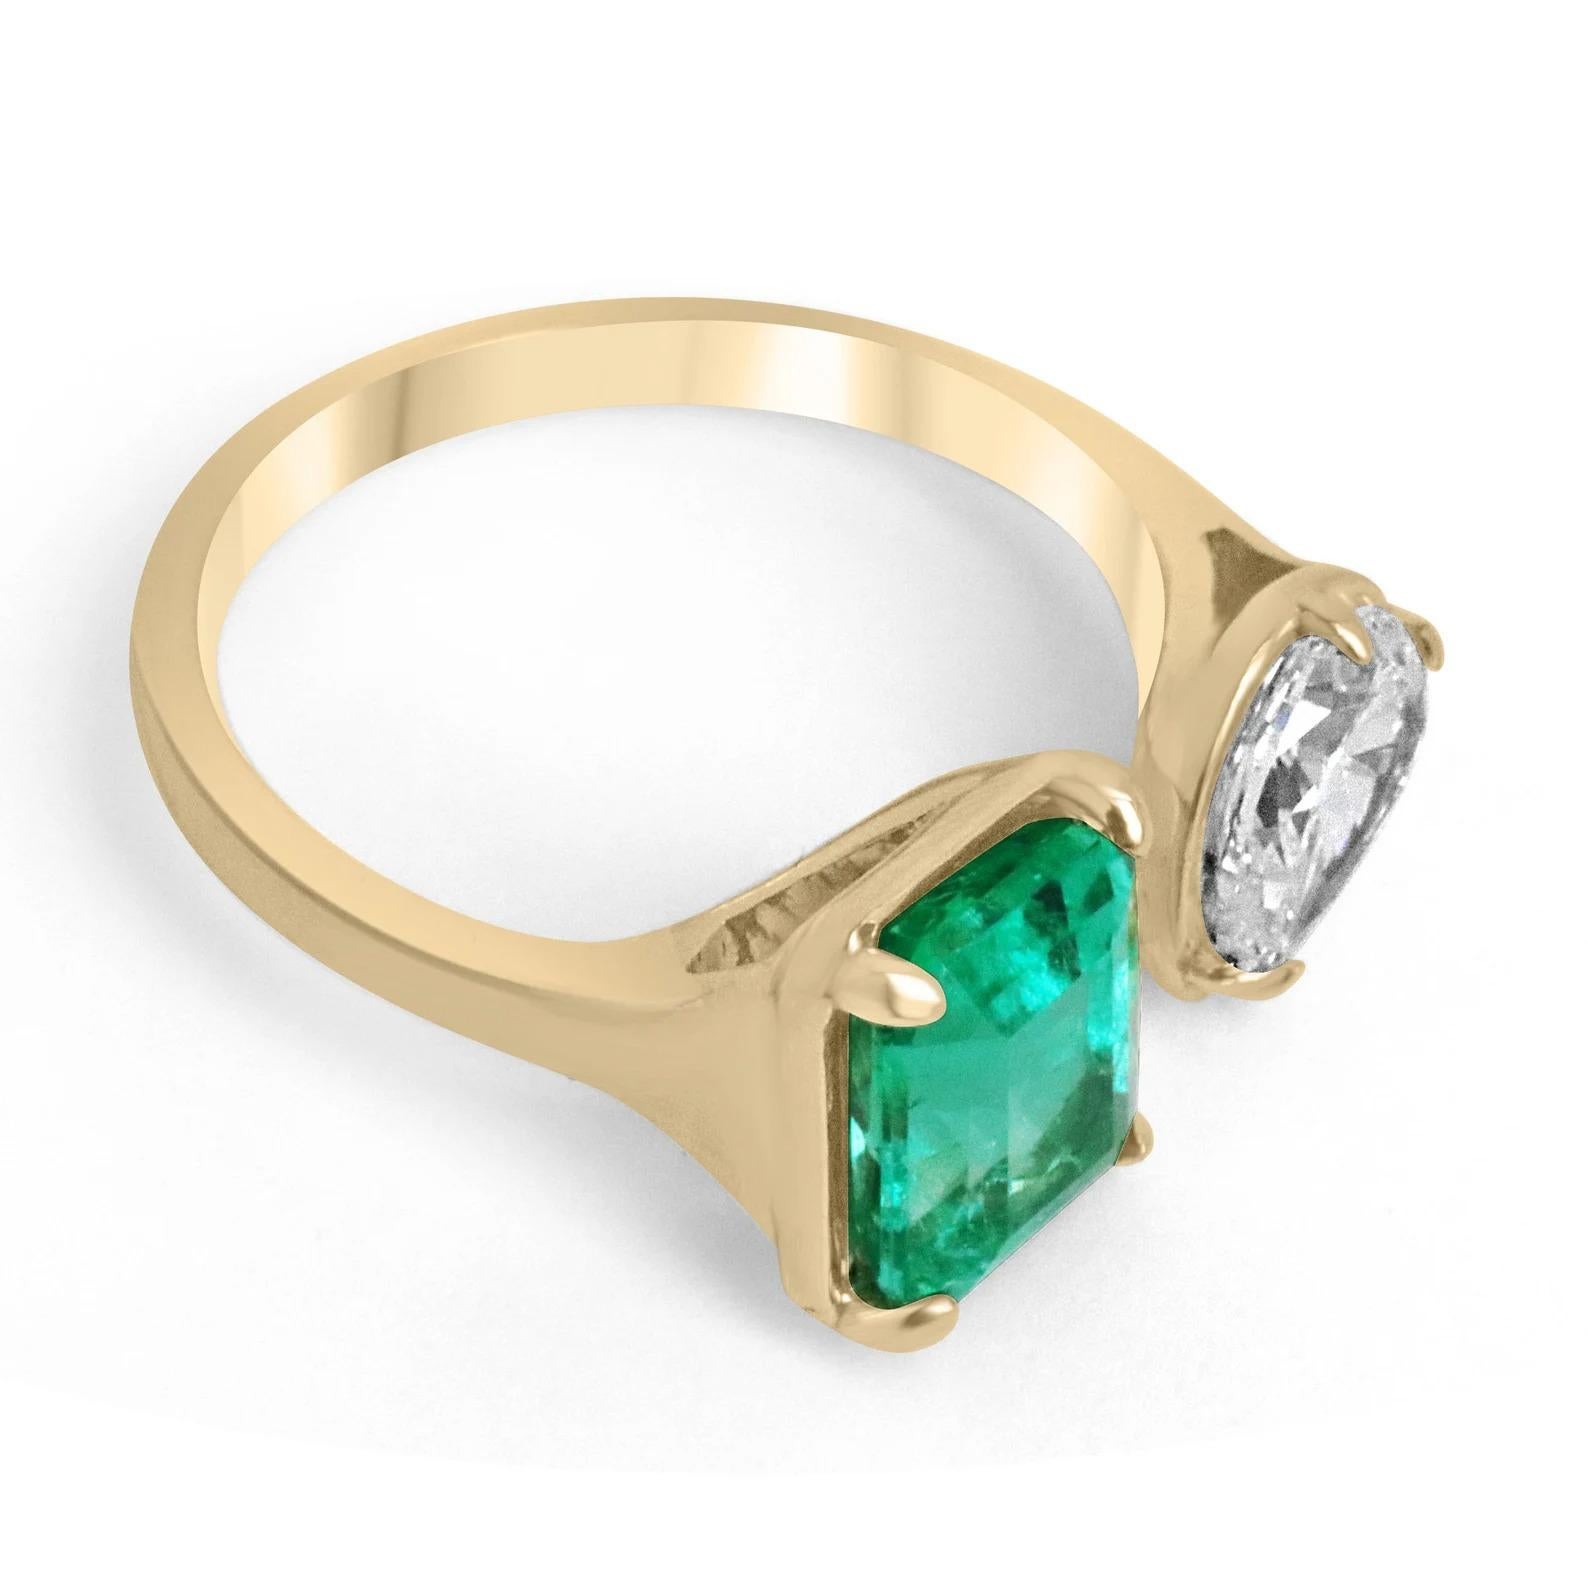 This is a stunning solid 18K yellow gold, AAA heirloom Colombian emerald & diamond statement ring or right-hand ring. Absolutely stylish and sleek, ideal as a stand-alone piece or worn with other statement pieces. An emerald-cut Colombian emerald is